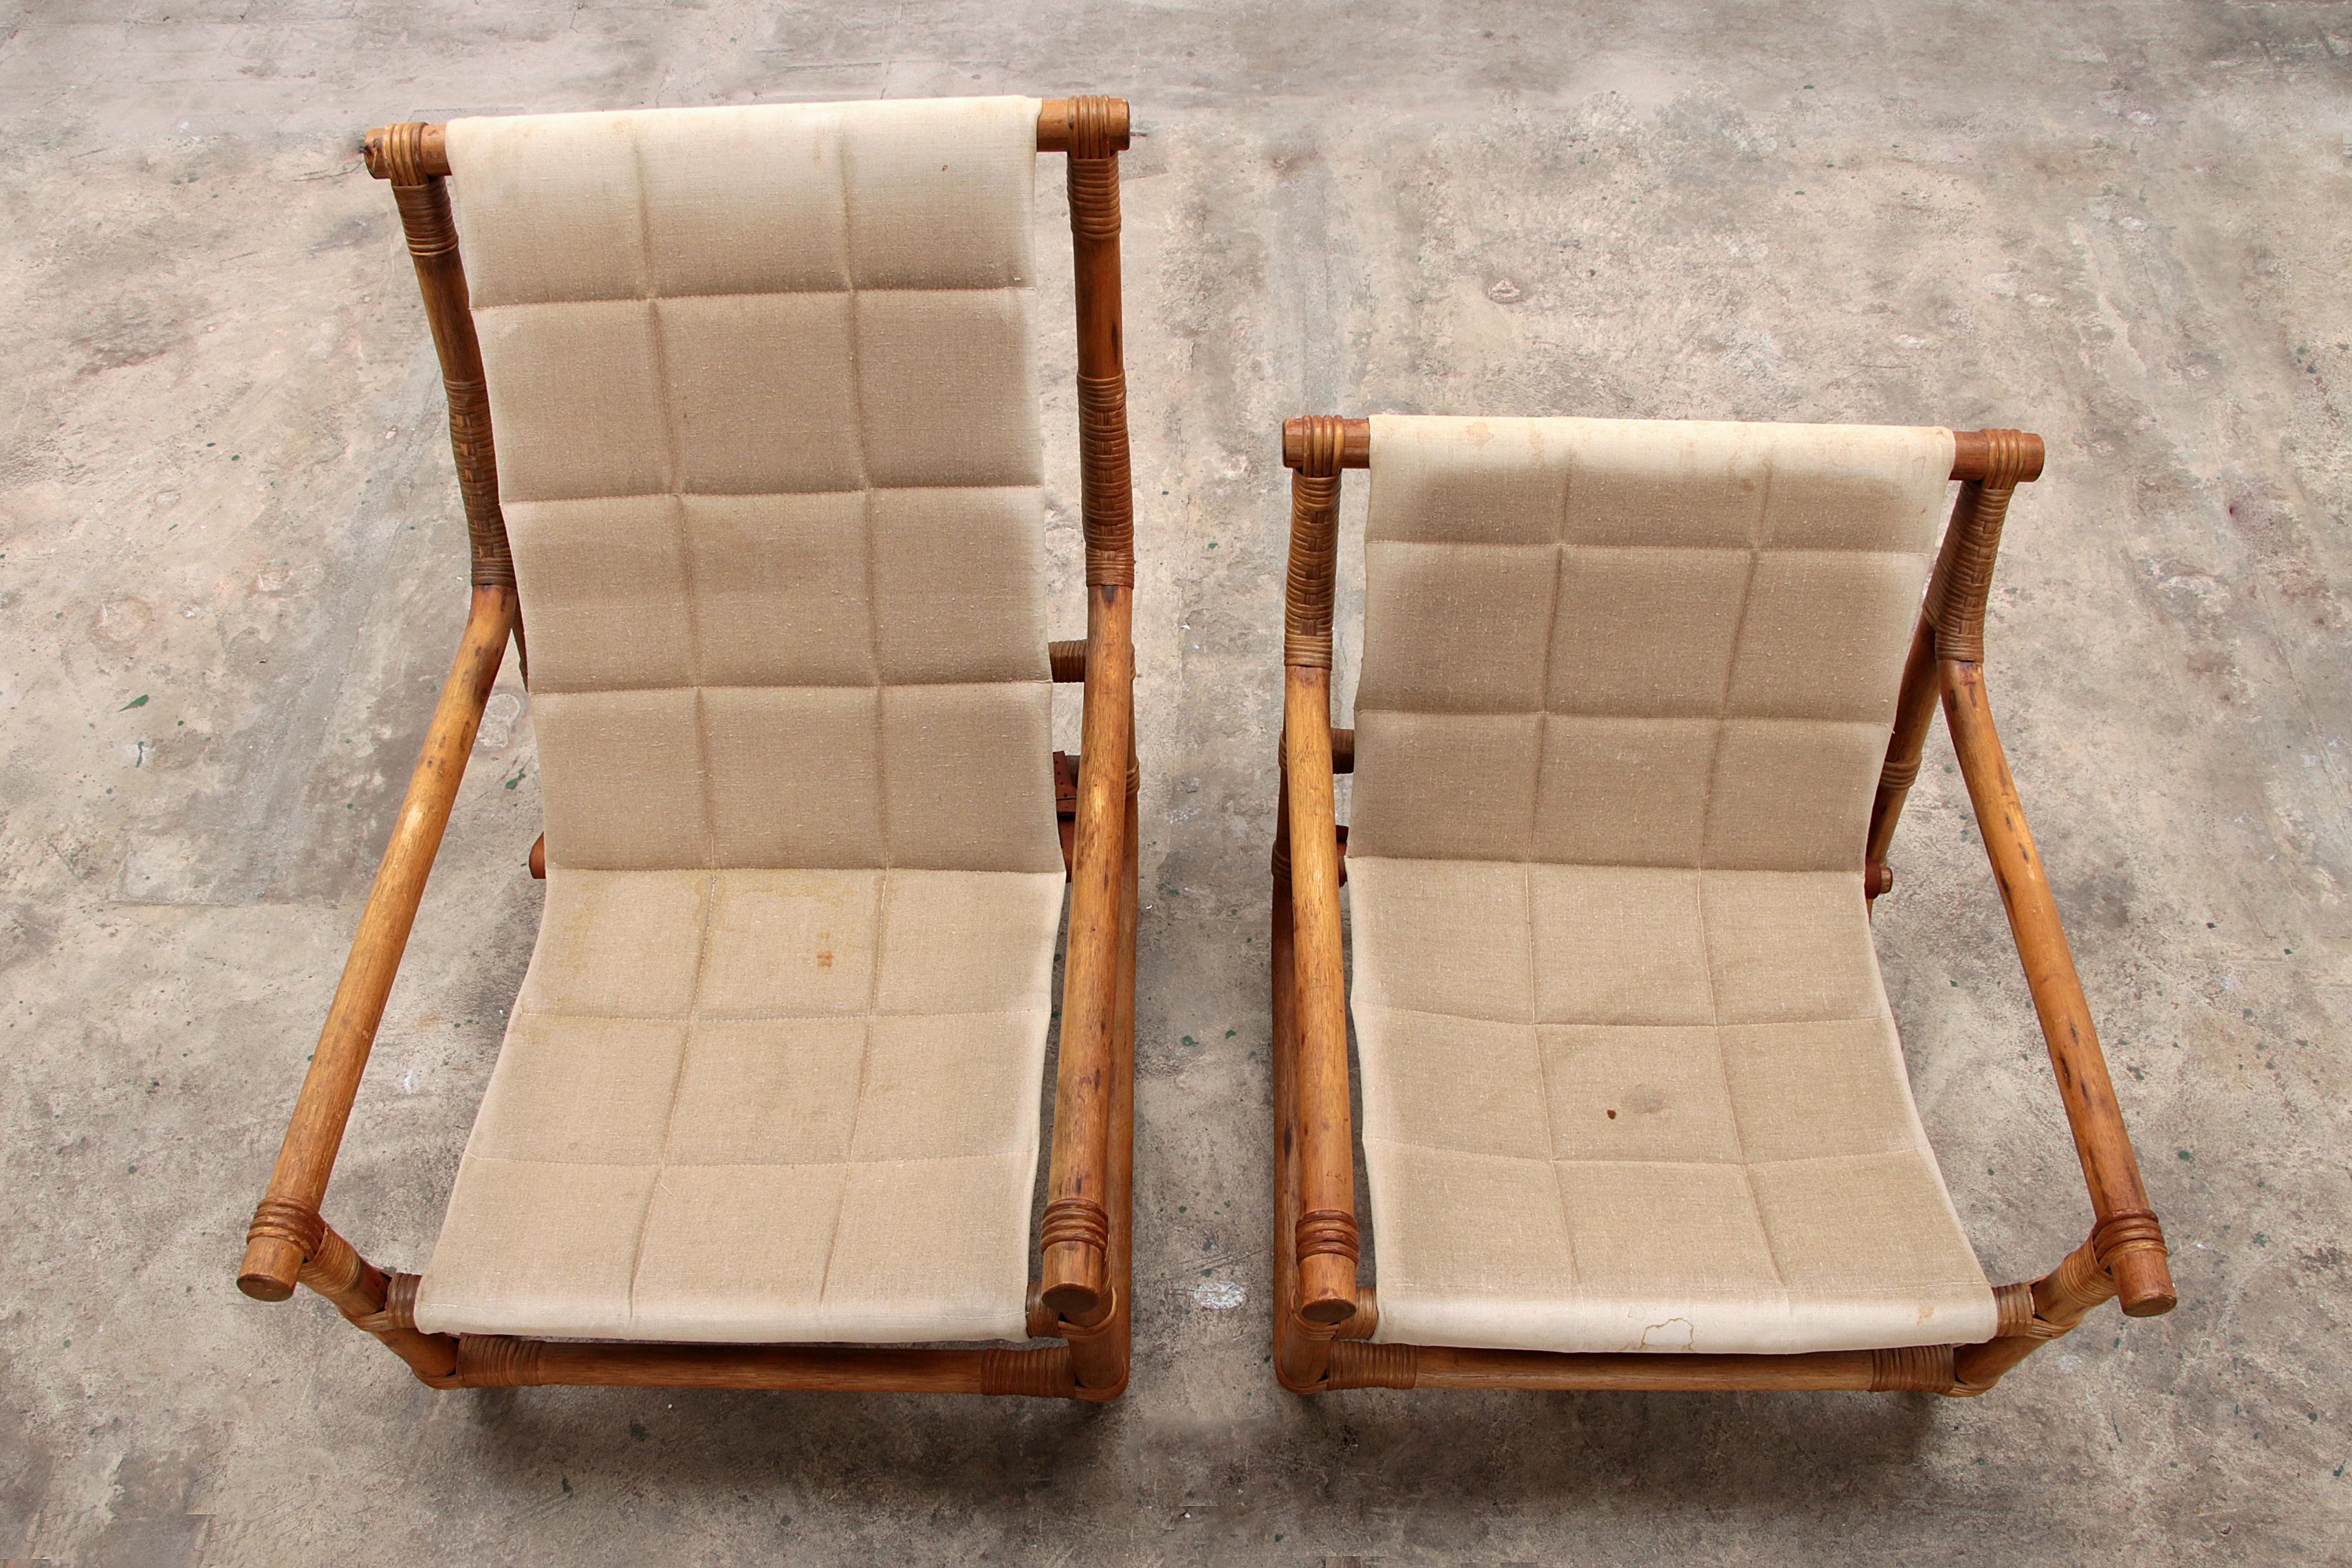 Vintage Bamboo garden set with leather cushions, 1970 Norway. For Sale 9